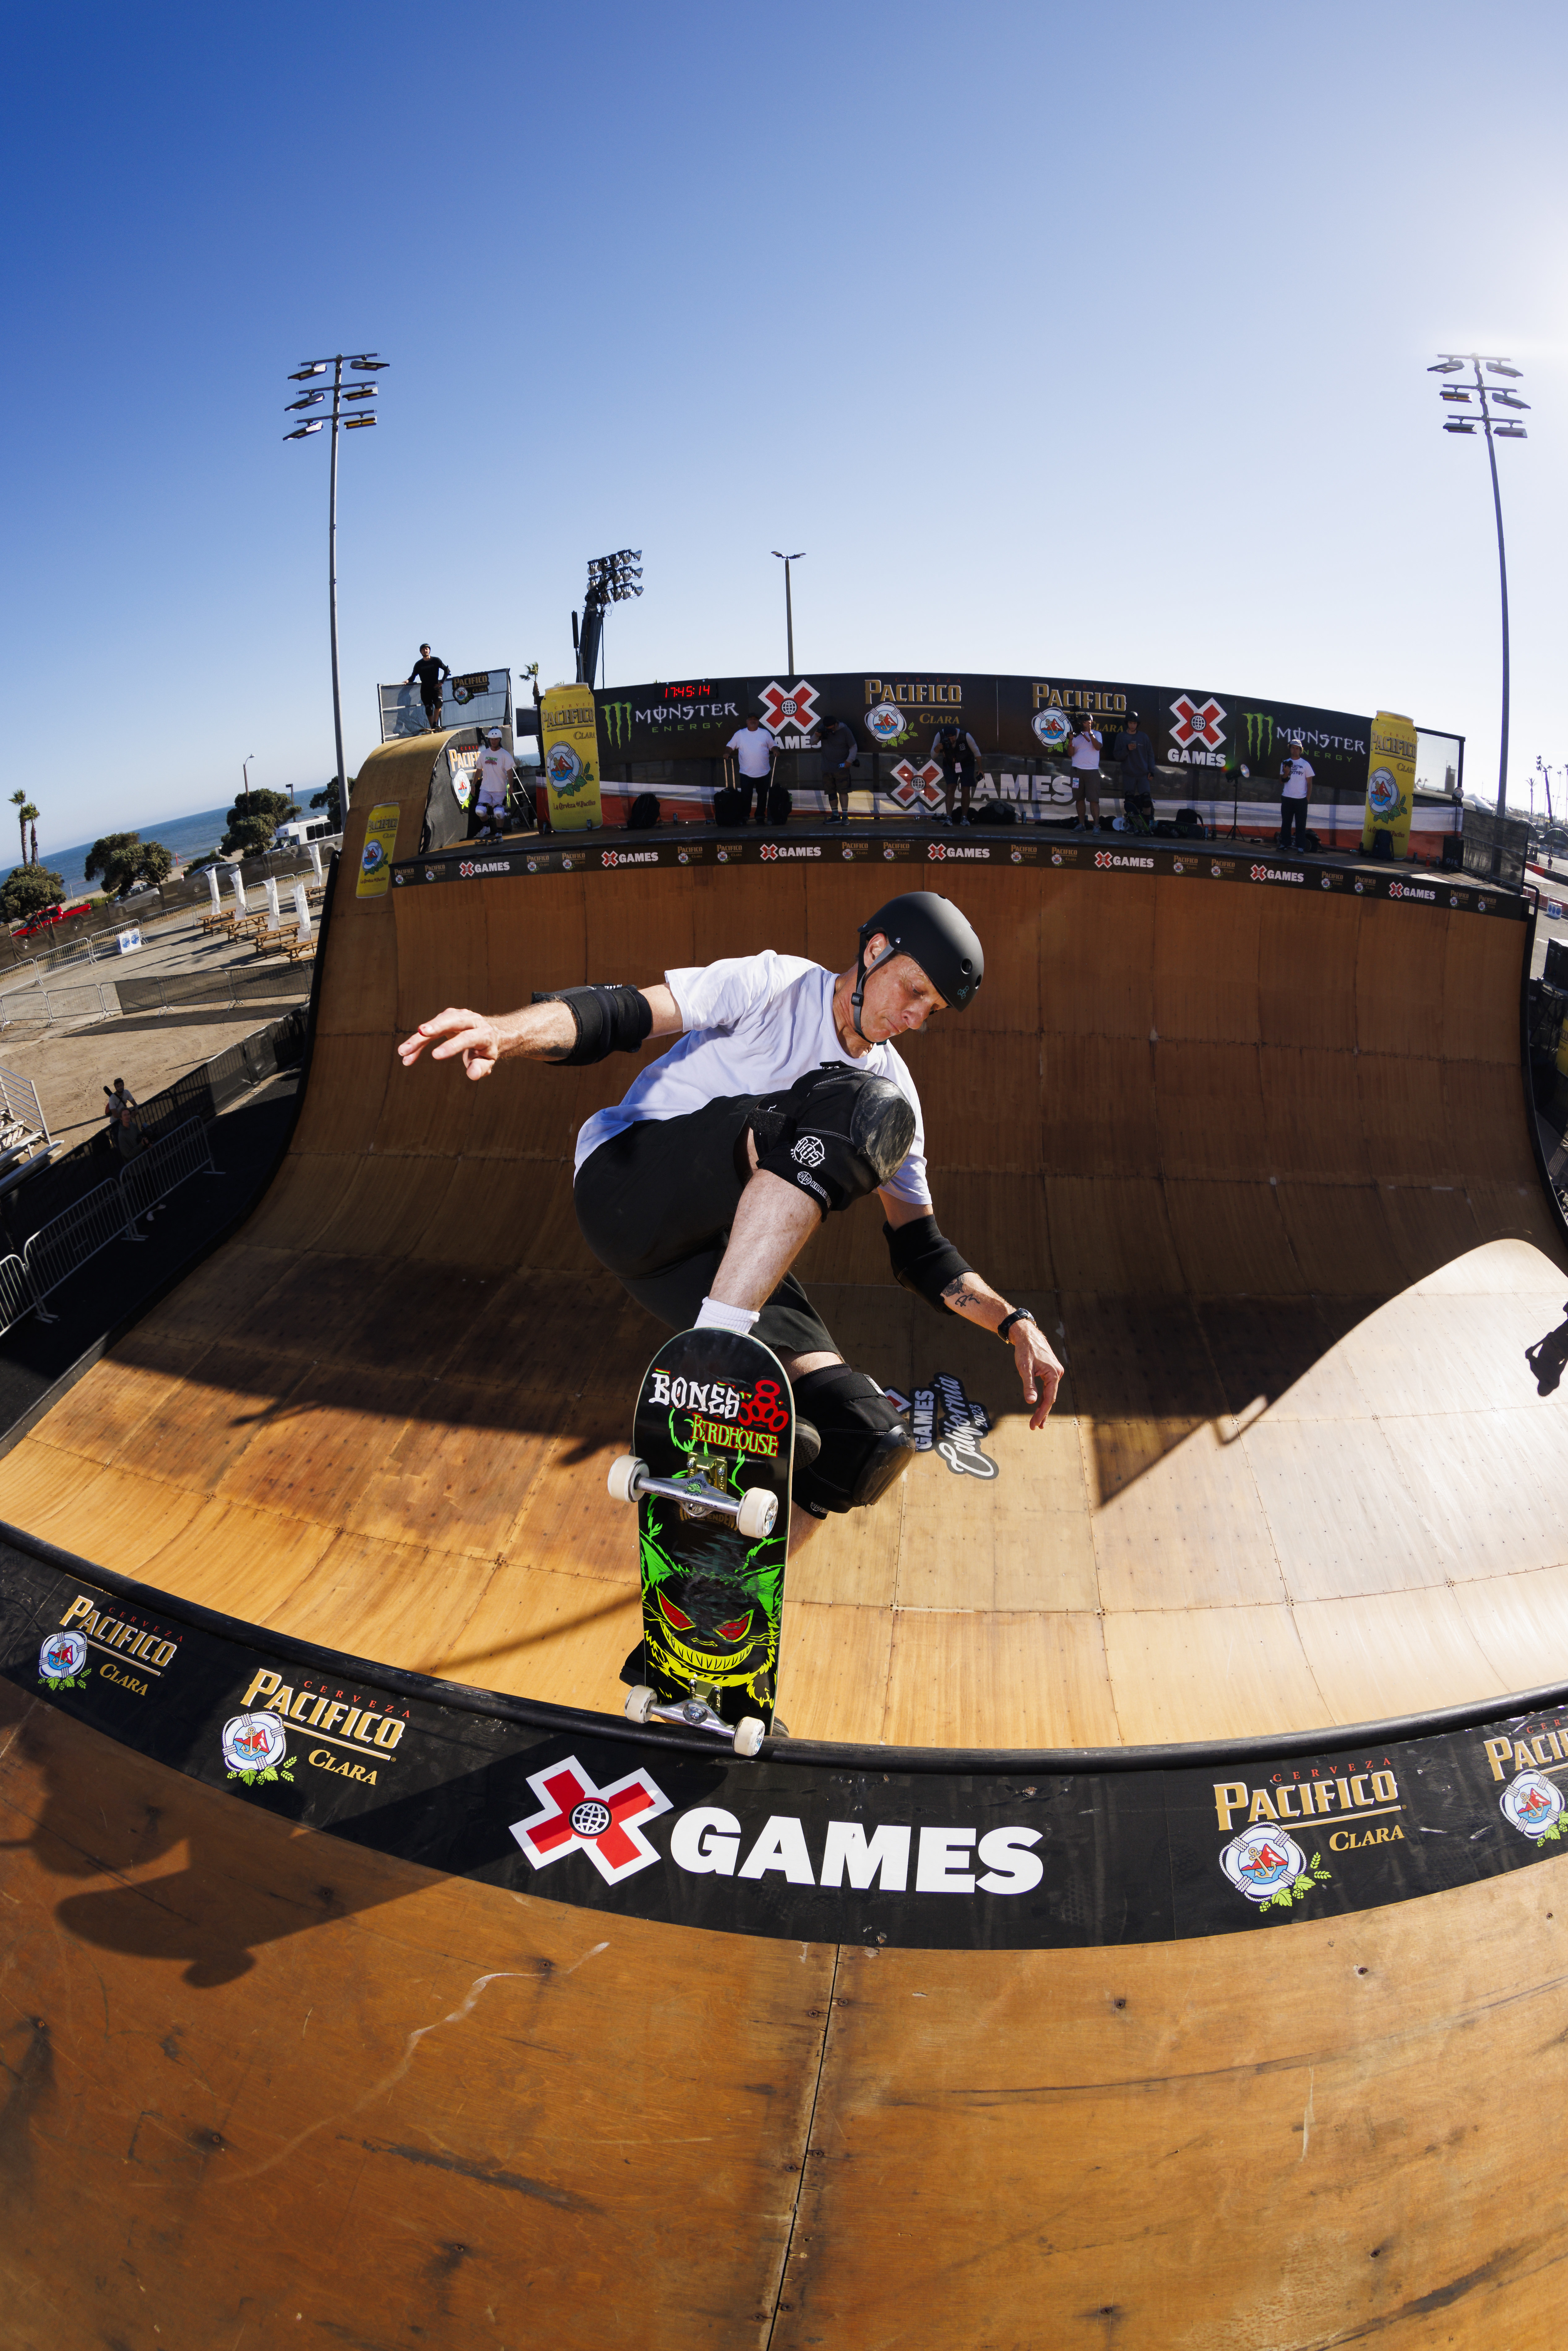 Tony Hawk performs a skateboard trick on a ramp at the X Games